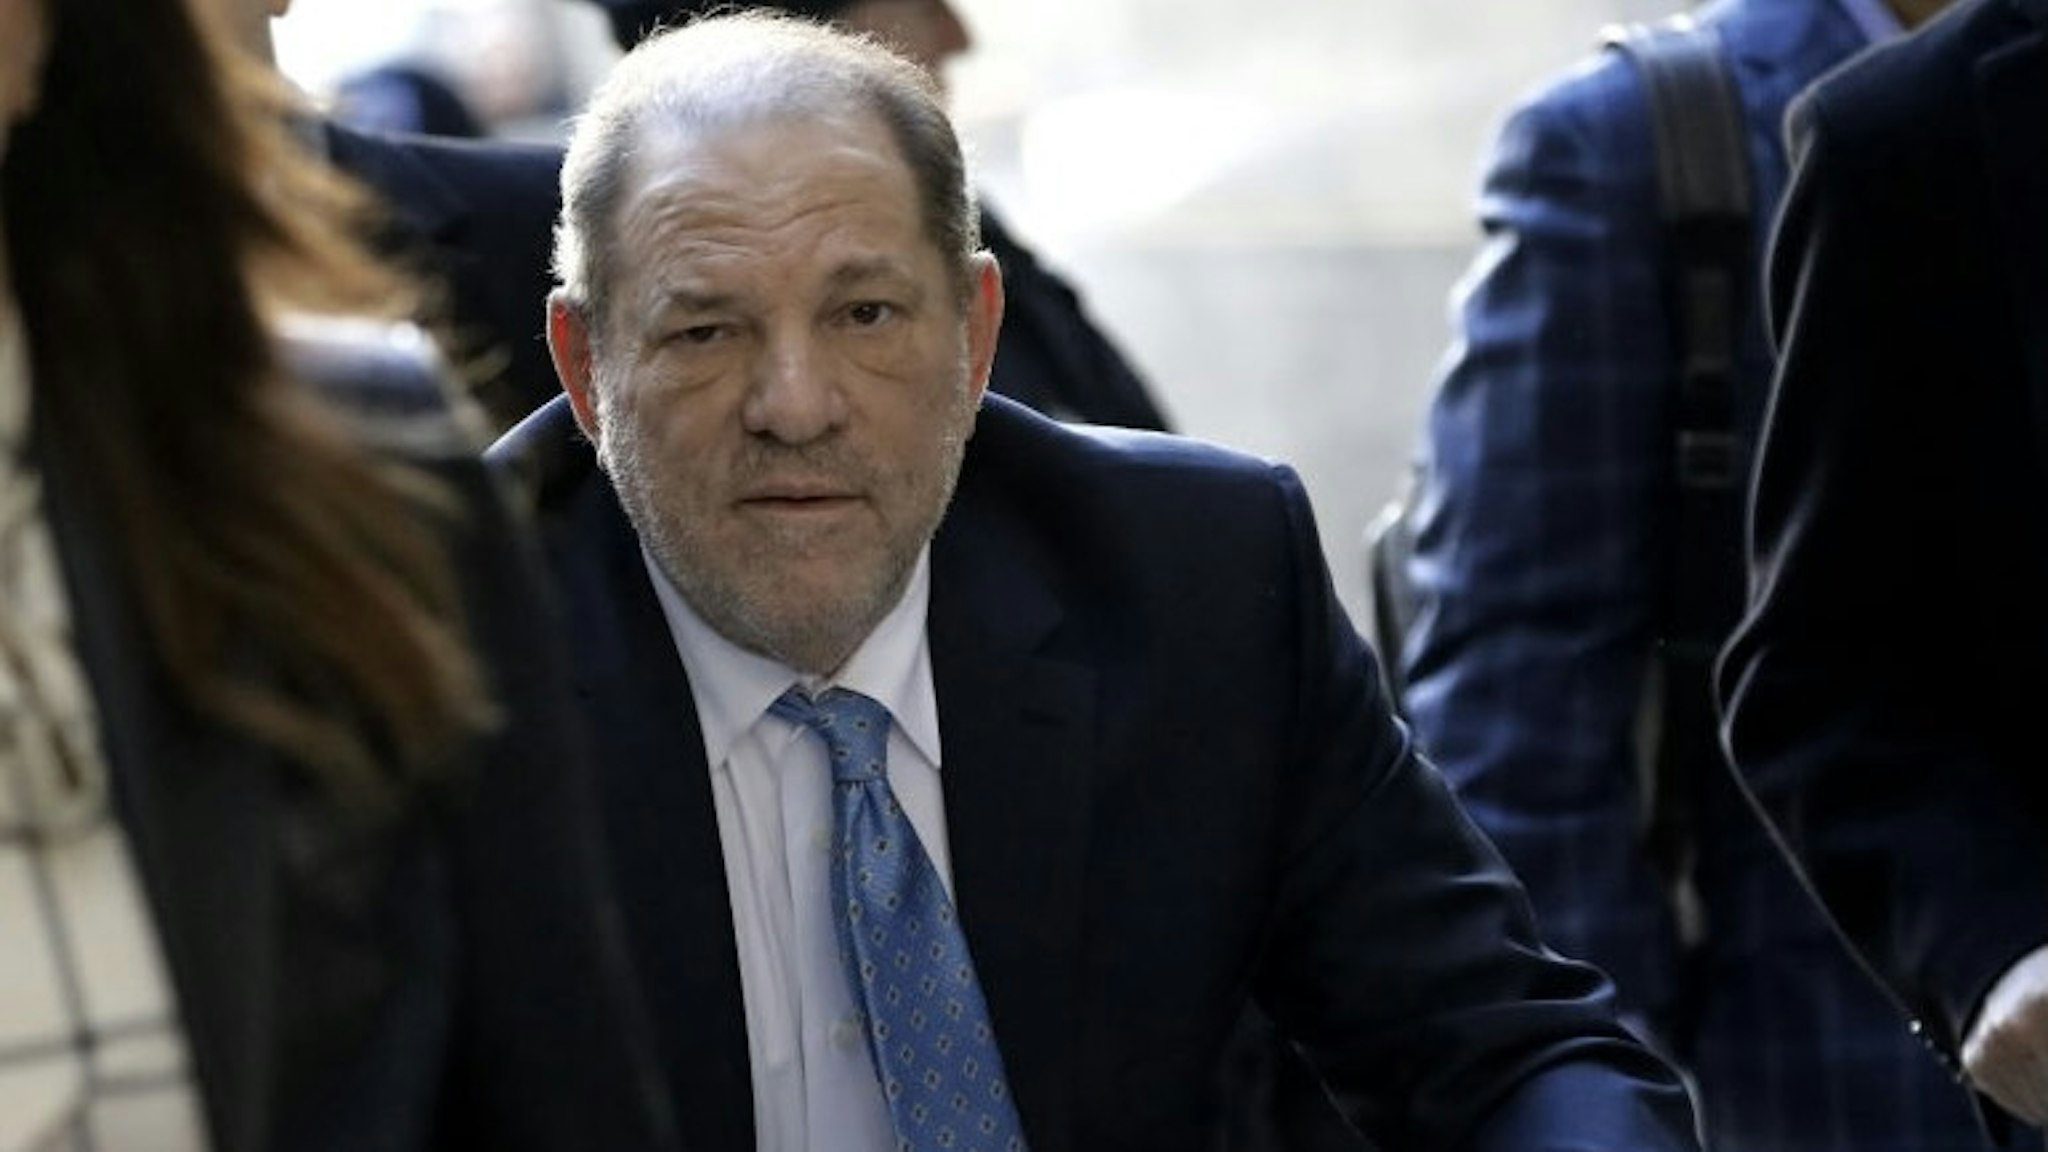 Harvey Weinstein, former co-chairman of the Weinstein Co., center, arrives with his attorney Donna Rotunno, left, at state supreme court in New York, U.S., on Monday, Feb. 24, 2020. Jurors at Weinstein's trial are set to resume deliberations Monday after signaling they are at odds on the top charges, AP reports. Photographer: Peter Foley/Bloomberg